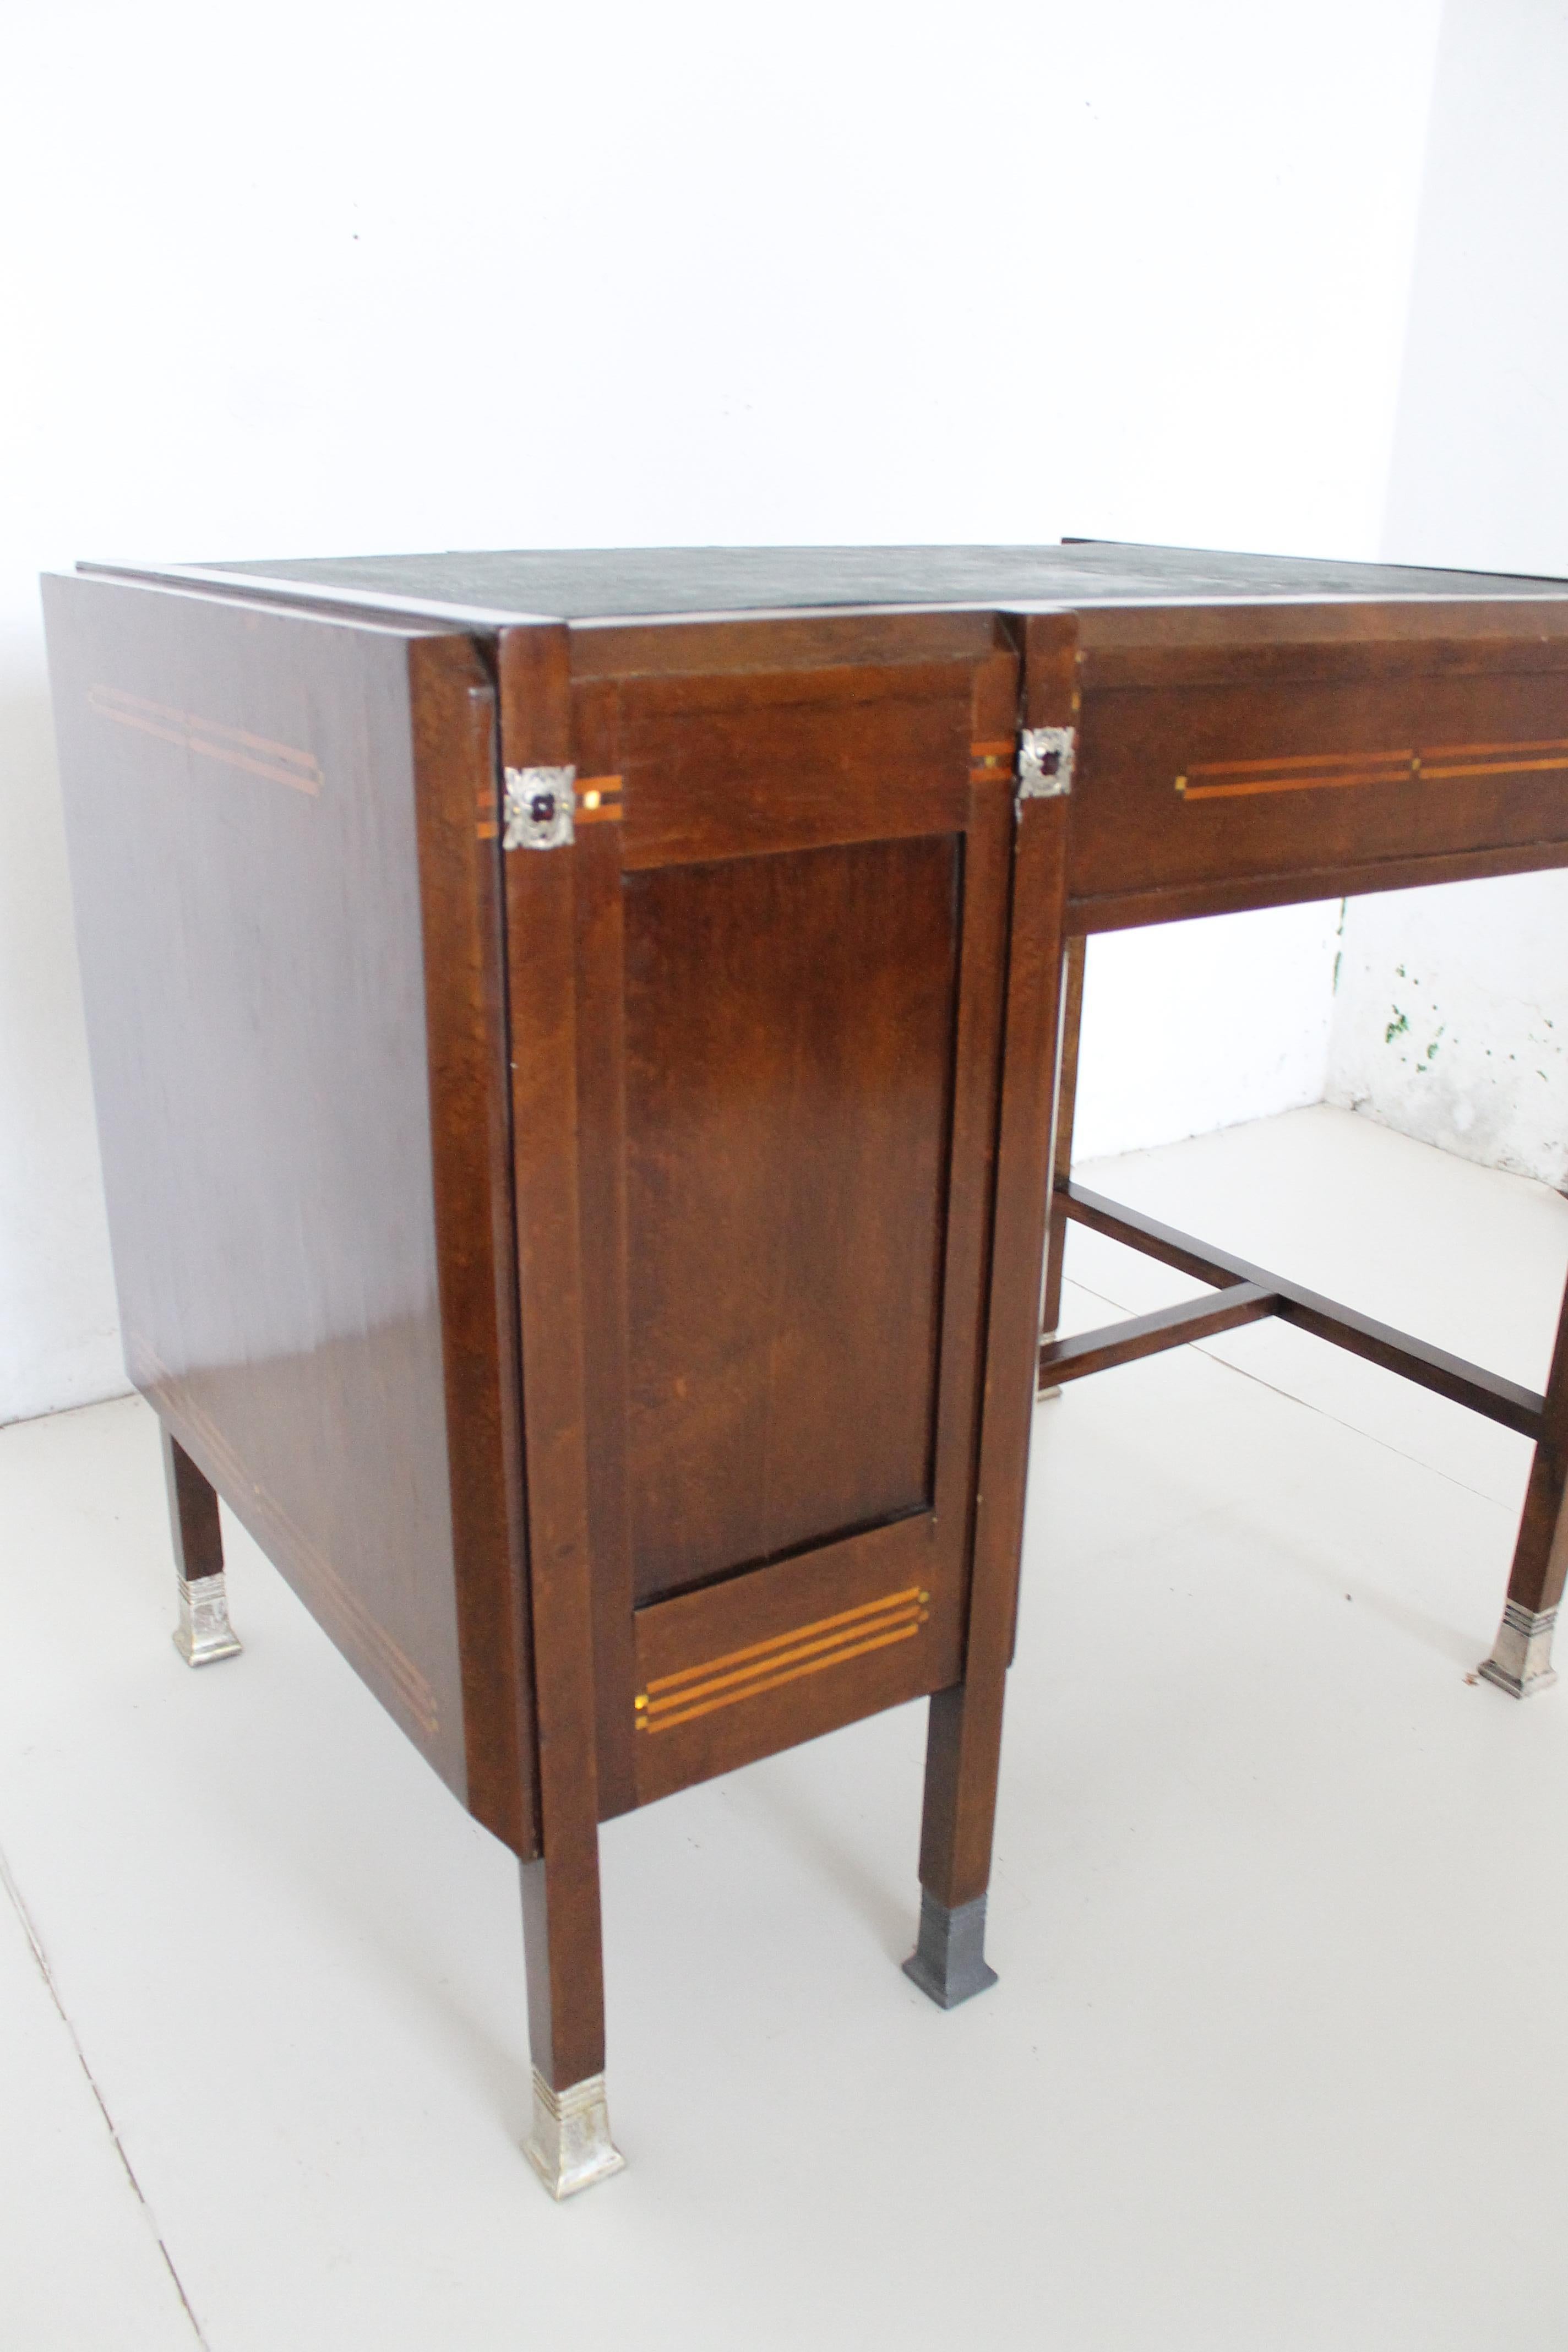 Piero Zen Small Desk with Maple and Mather of Pearl Inlays, Italy Milan For Sale 2